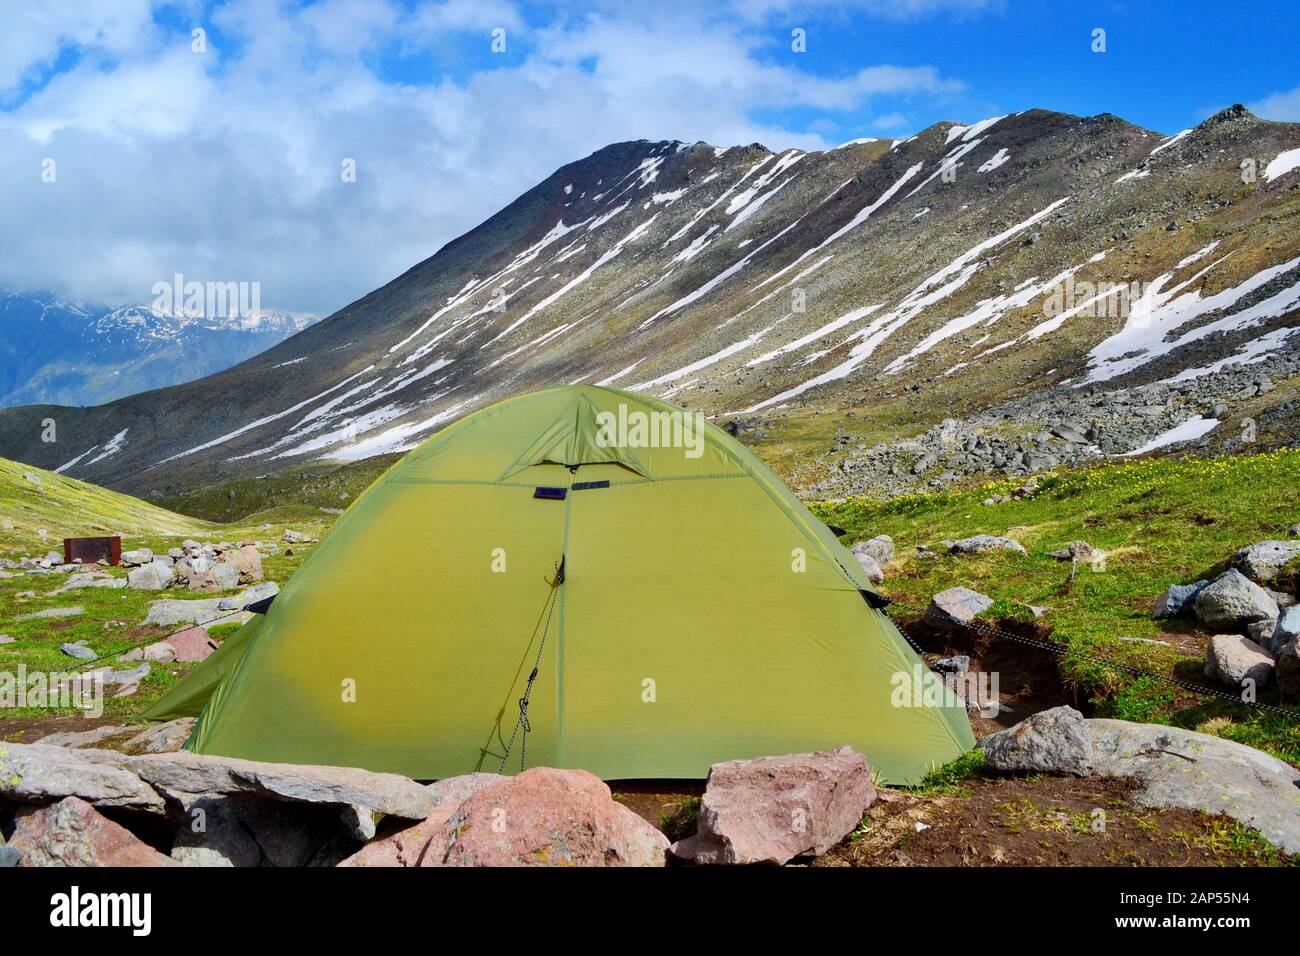 Sleeping in the tent below the Kazbek Mountain above the small city of Stepantsminda. Sunny day, beautiful views. Stock Photo